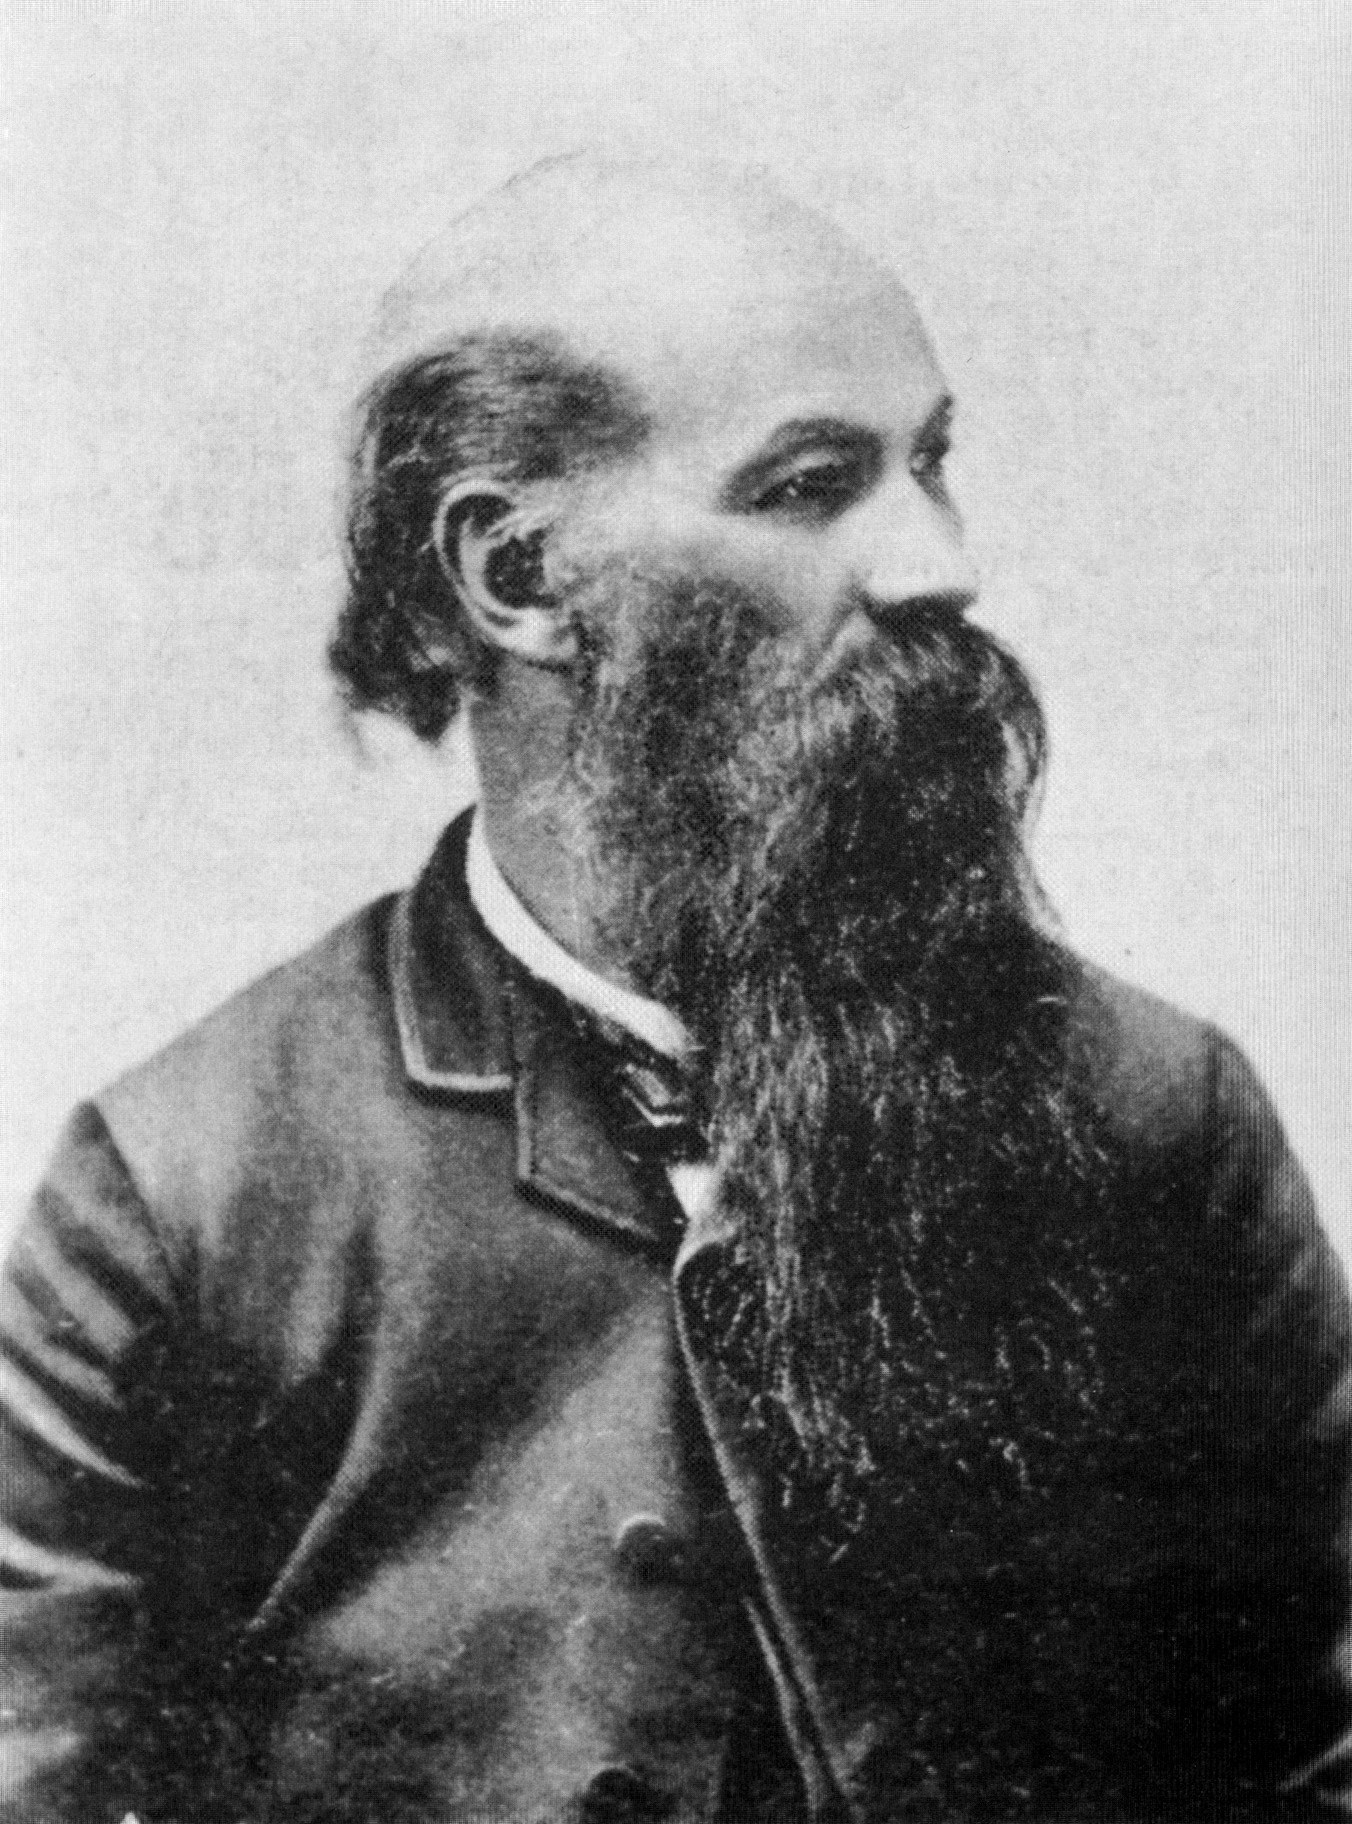 A portrait of James Presley Ball with a long beard, wearing a jacket